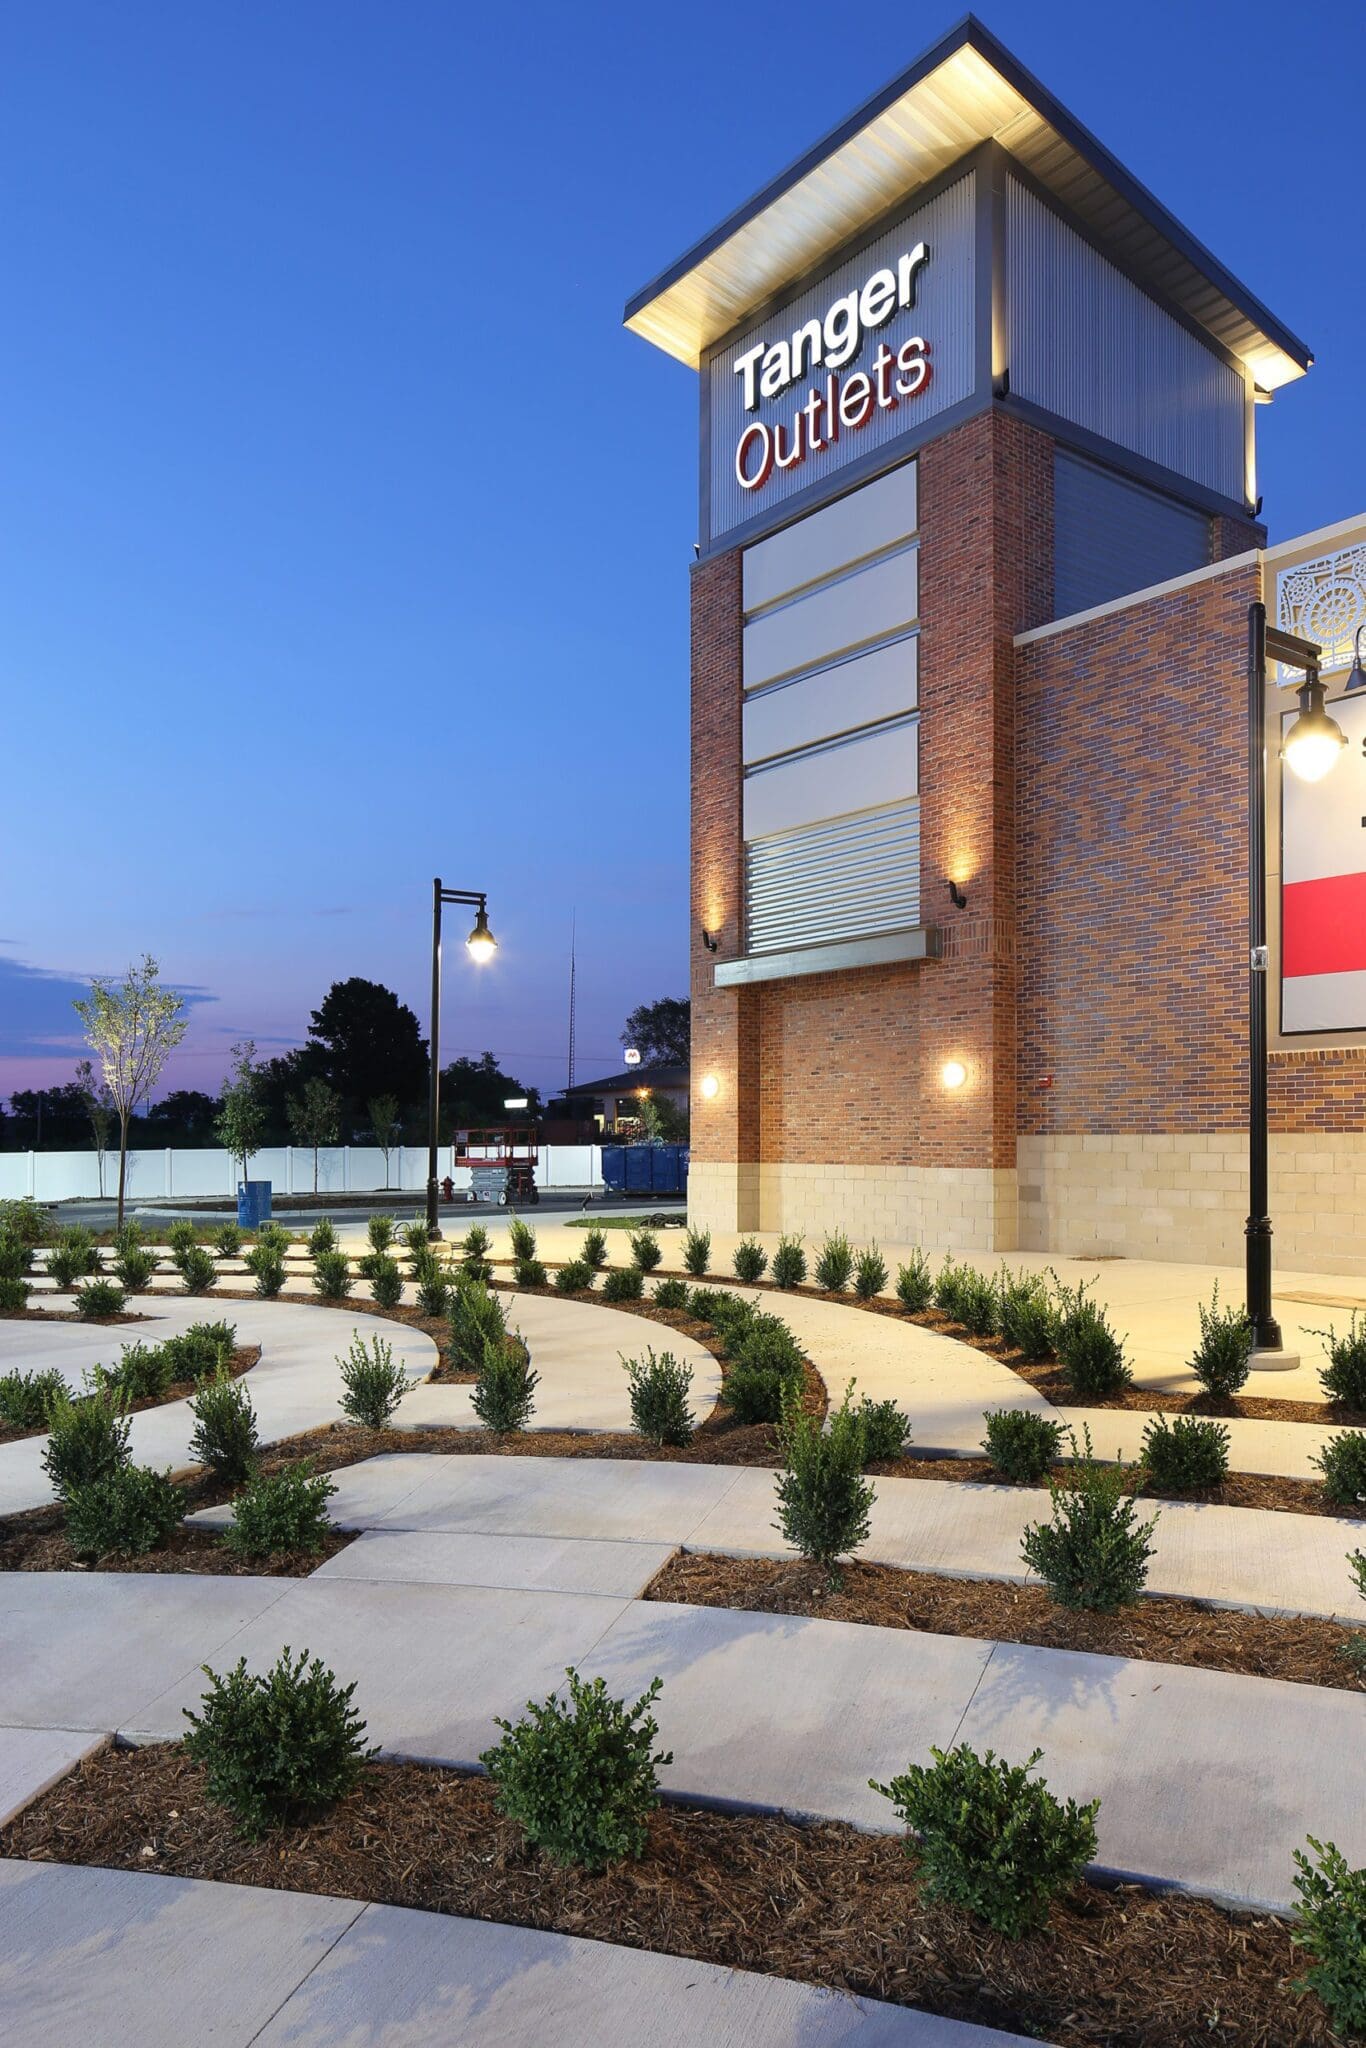 Outside View of the Tanger Outlets Grand Rapids